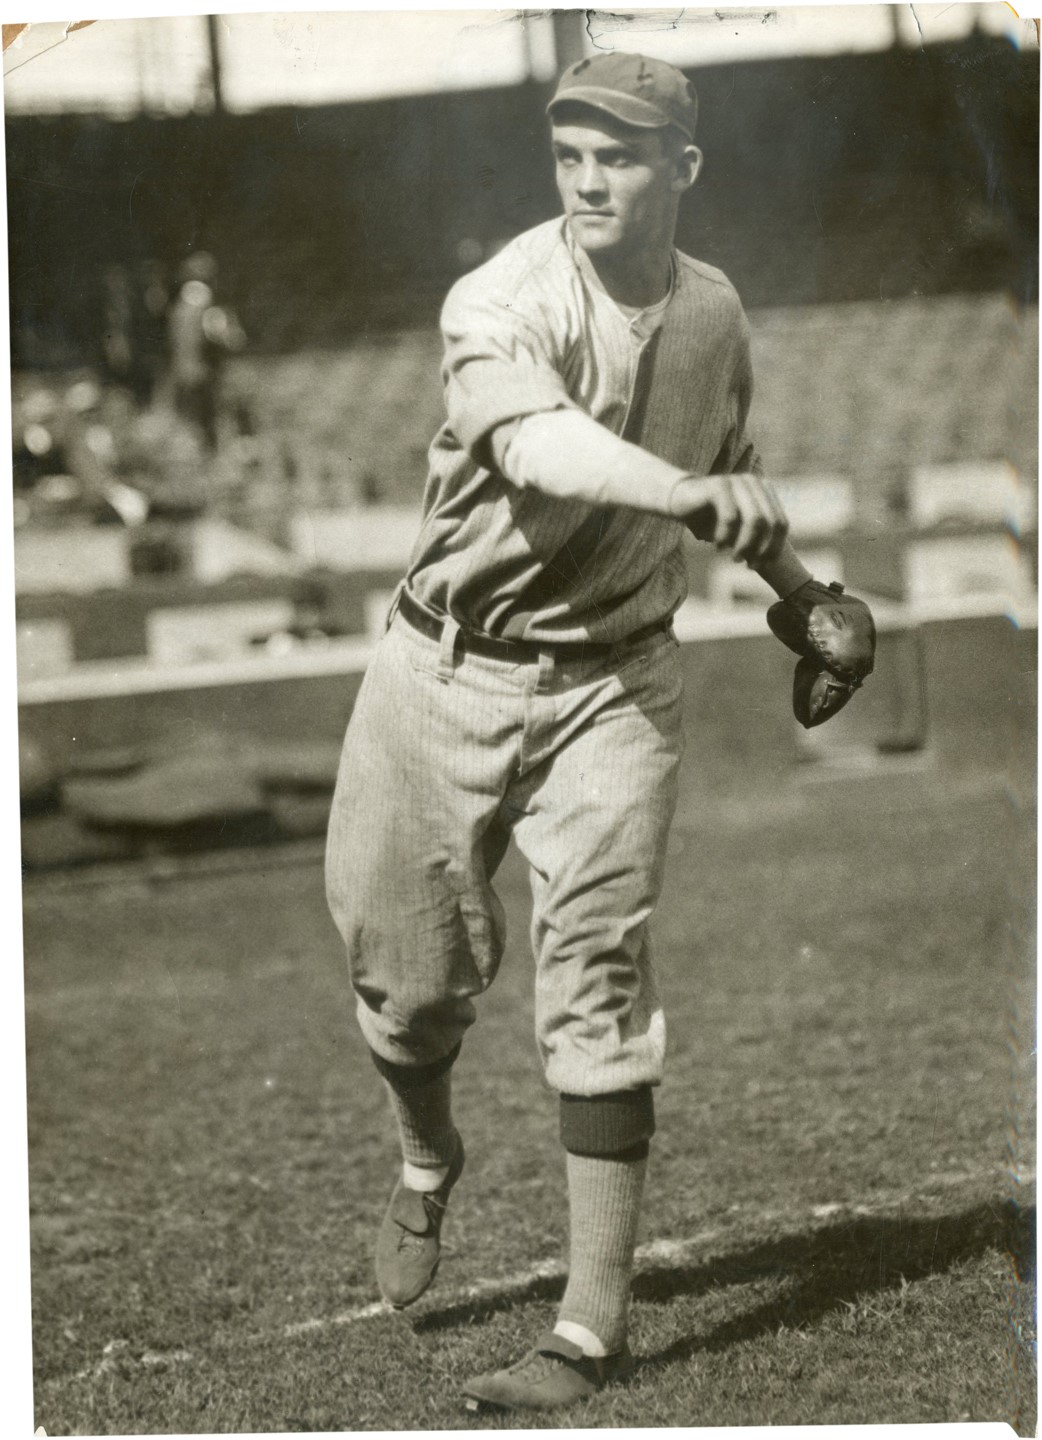 The Brown Brothers Collection - Black Sox Chick Gandil Photograph by Charles Conlon